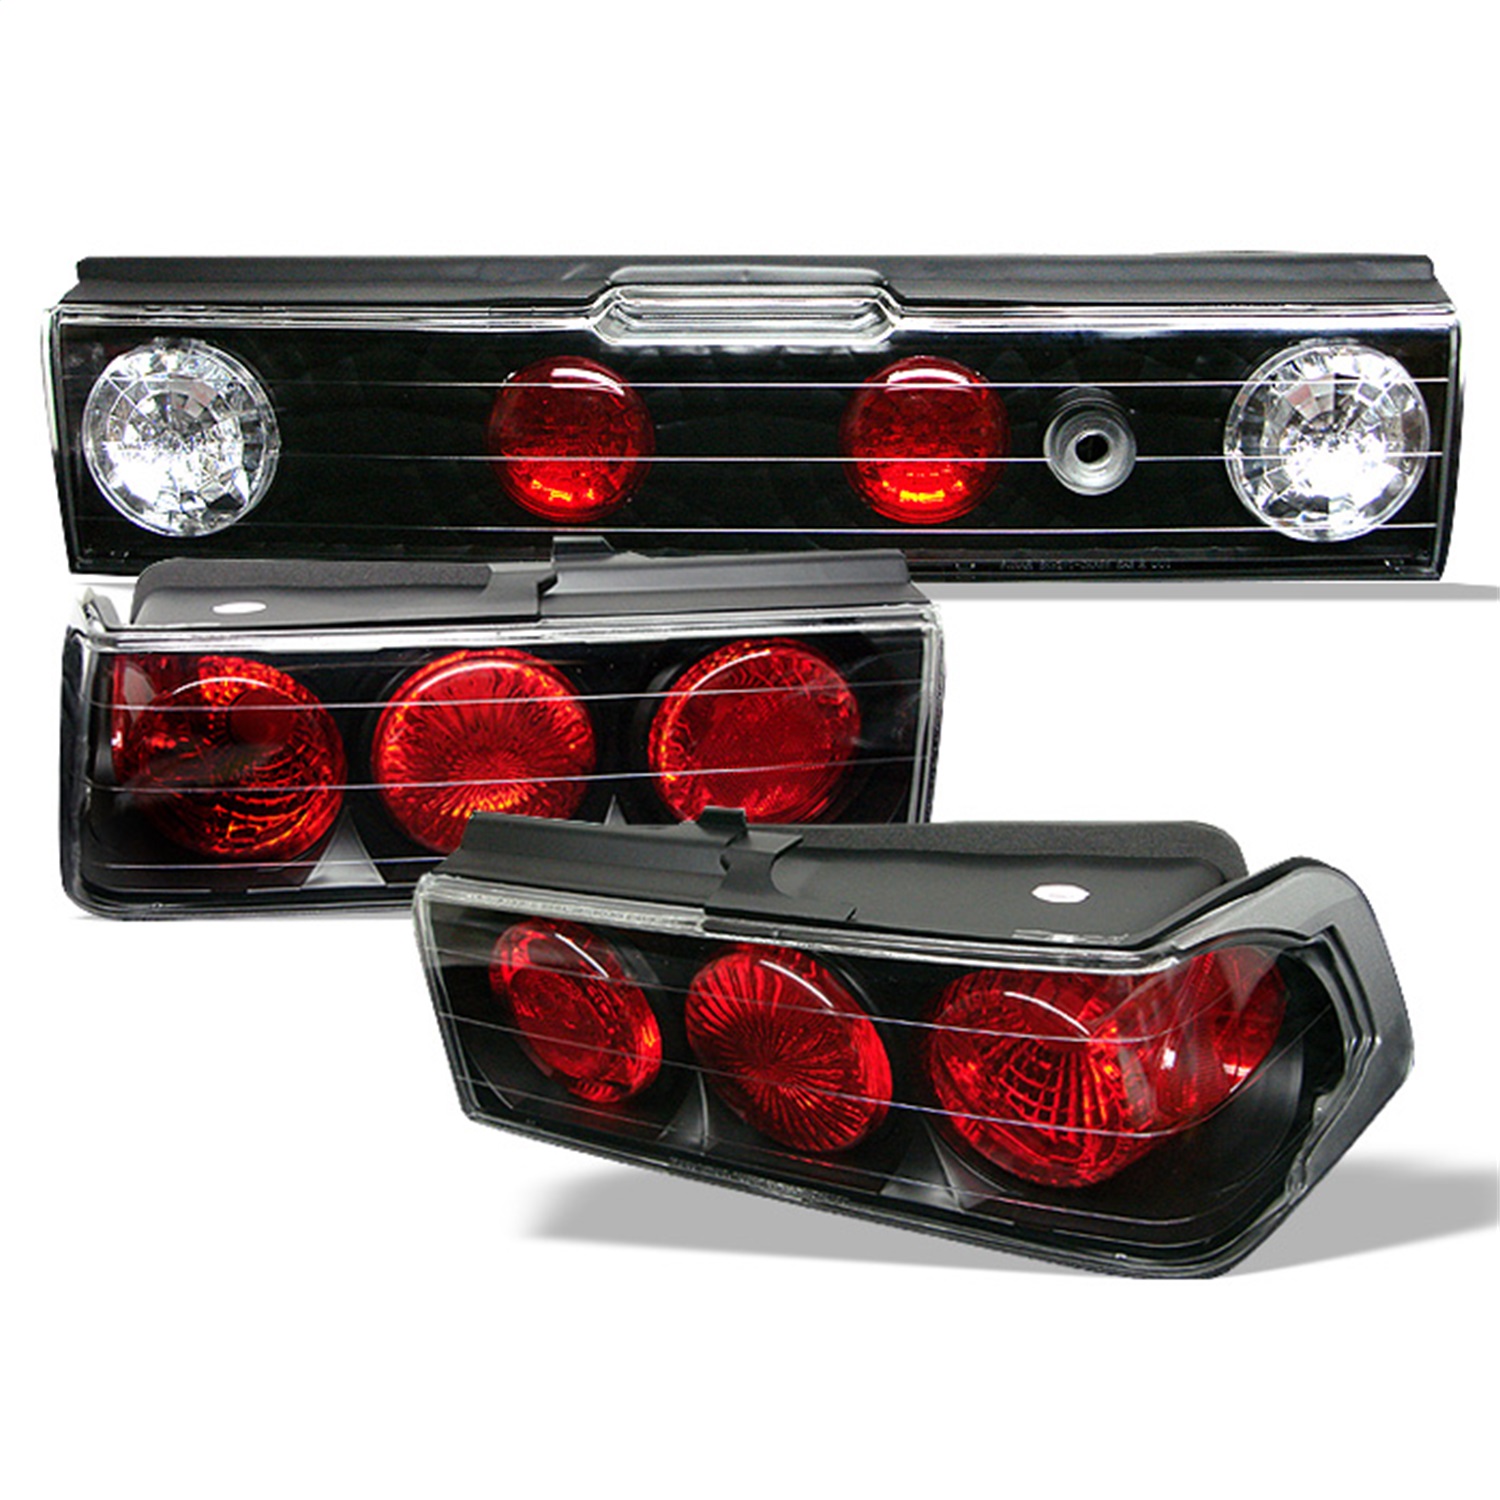 Spyder Auto 5005120 Euro Style Tail Lights Fits 88-91 CRX